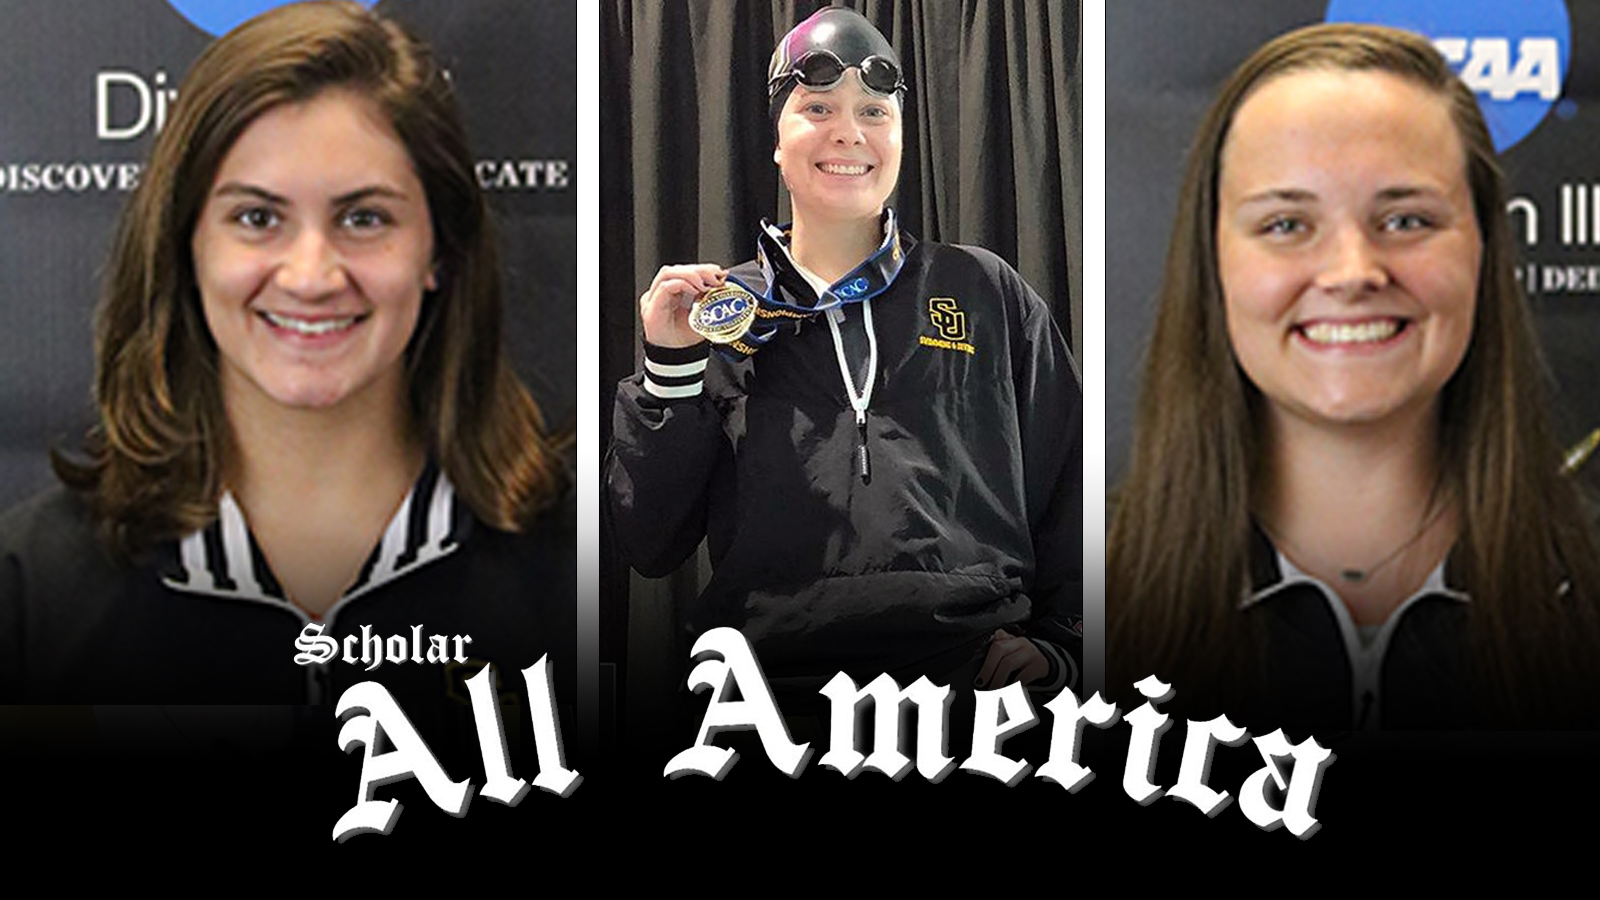 Three Pirates Named to CSCAA Scholar All-America Team